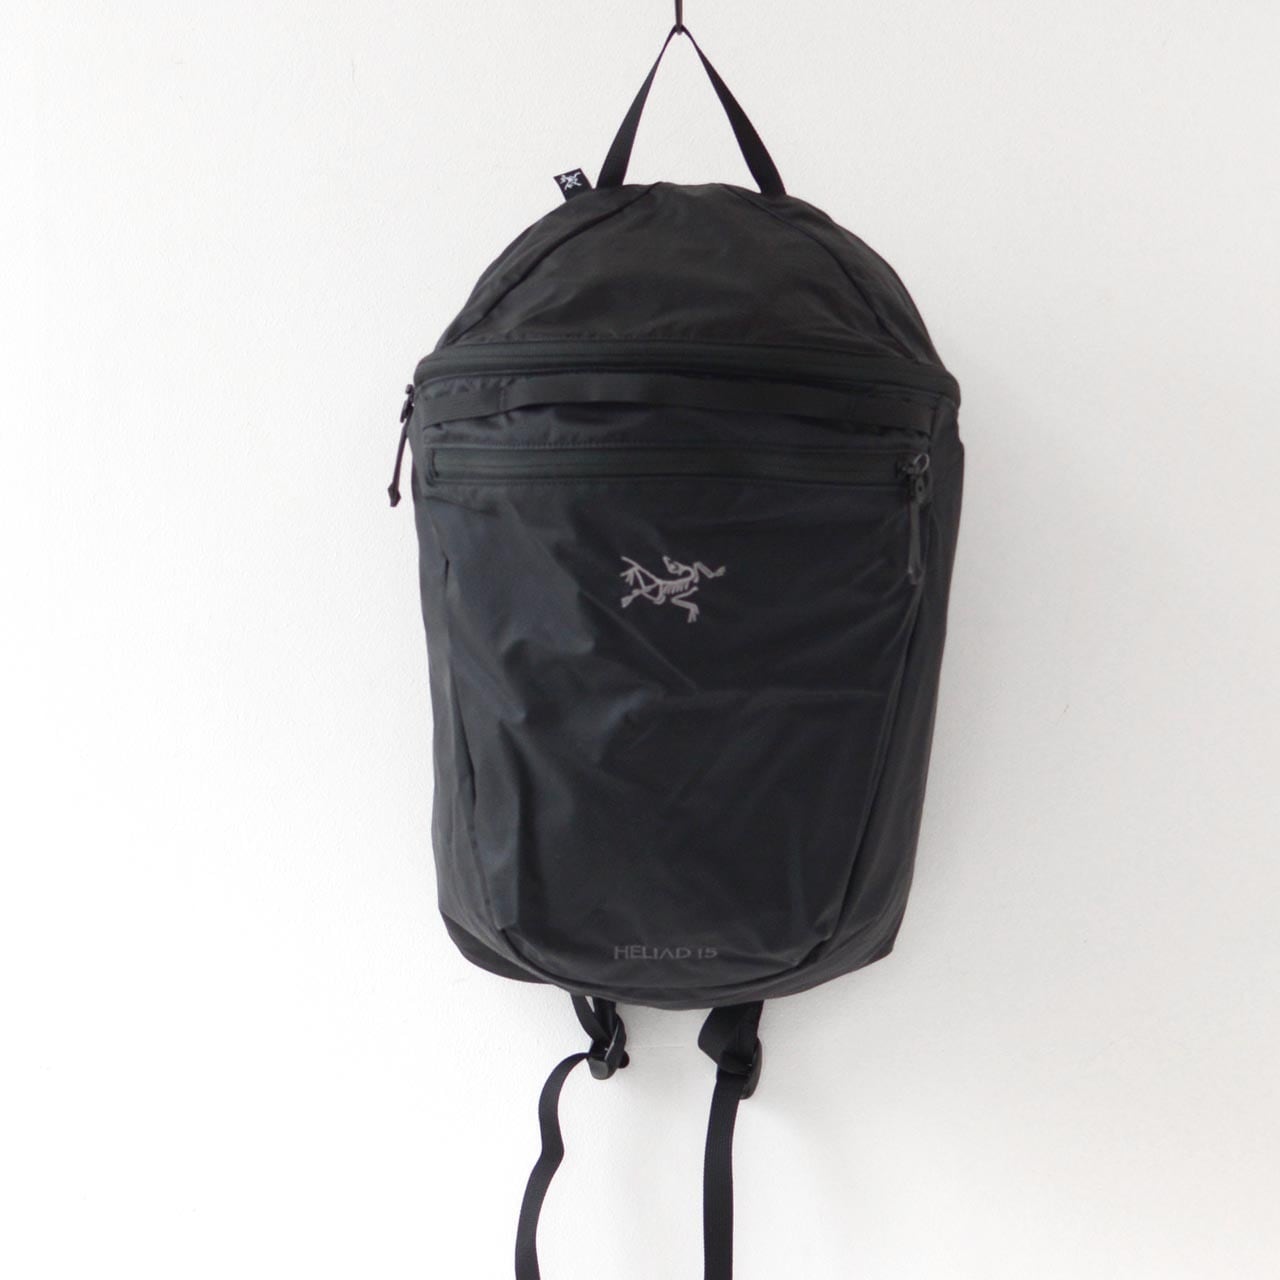 Heliad 15 Backpack ヒリアド 15 バックパック